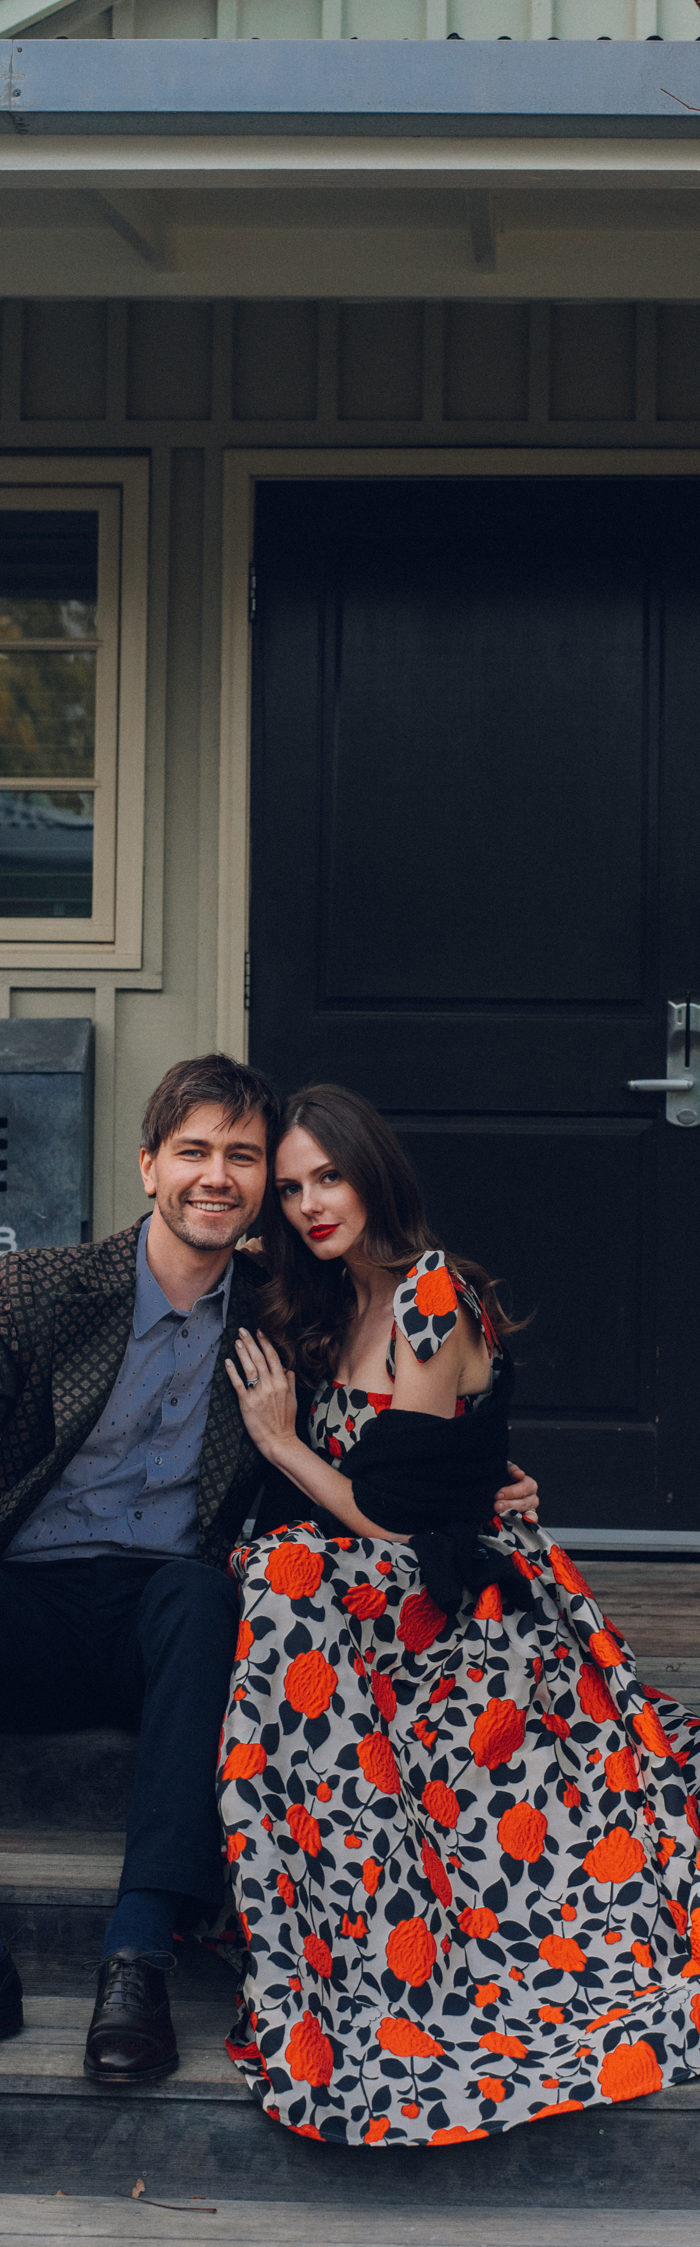 Torrance Coombs and Alyssa Campanella of The A List blog visits Carneros Resort & Spa in November 2018 for cabernet season in a Harvest Cottage wearing Georgia Hardinge poppy willow dress and Mr. Turk suit